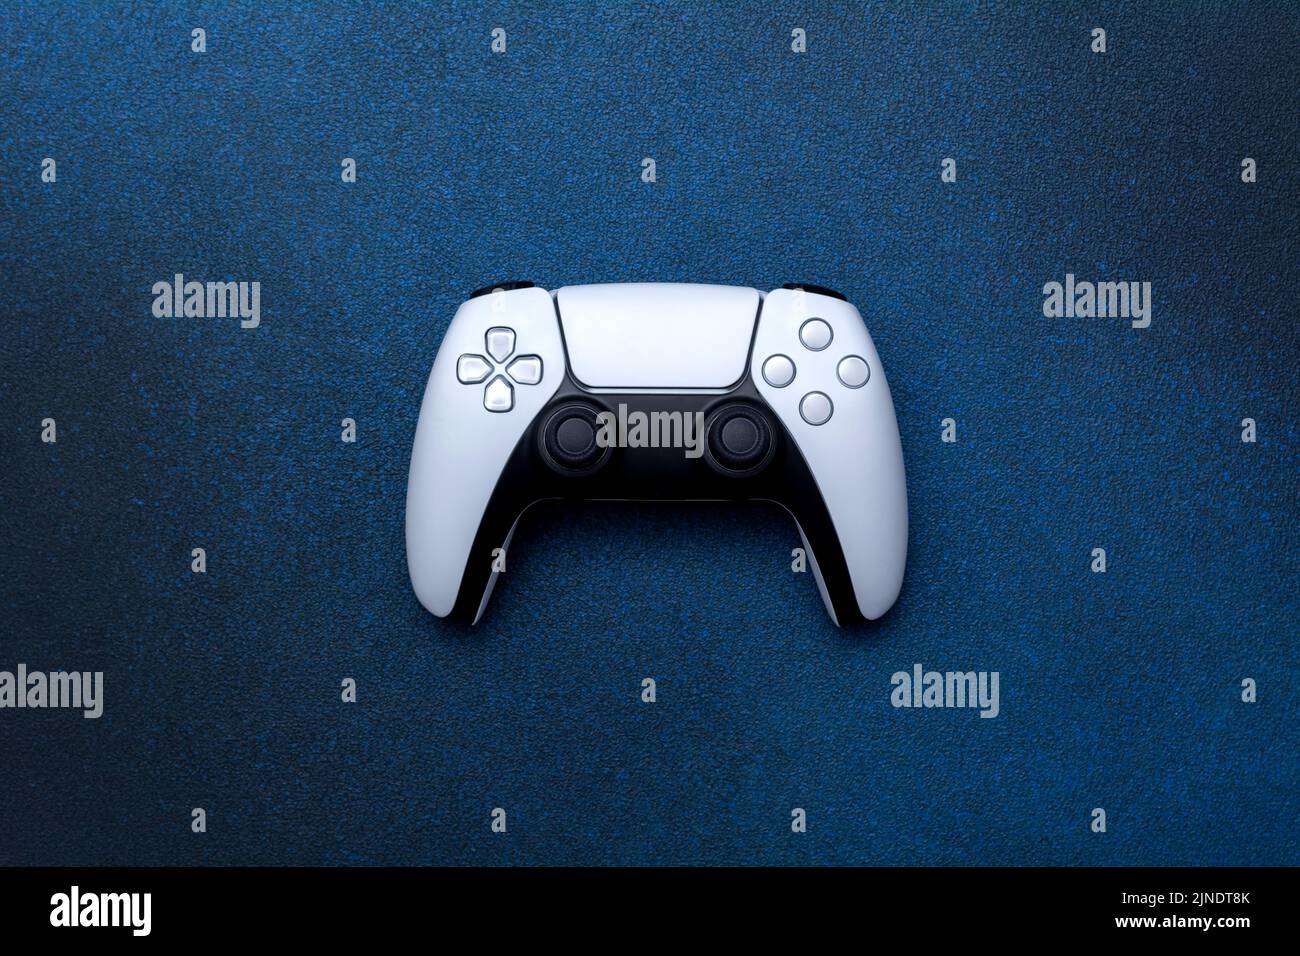 Game controller on a blue background. White joystick for computer games top view. Stock Photo